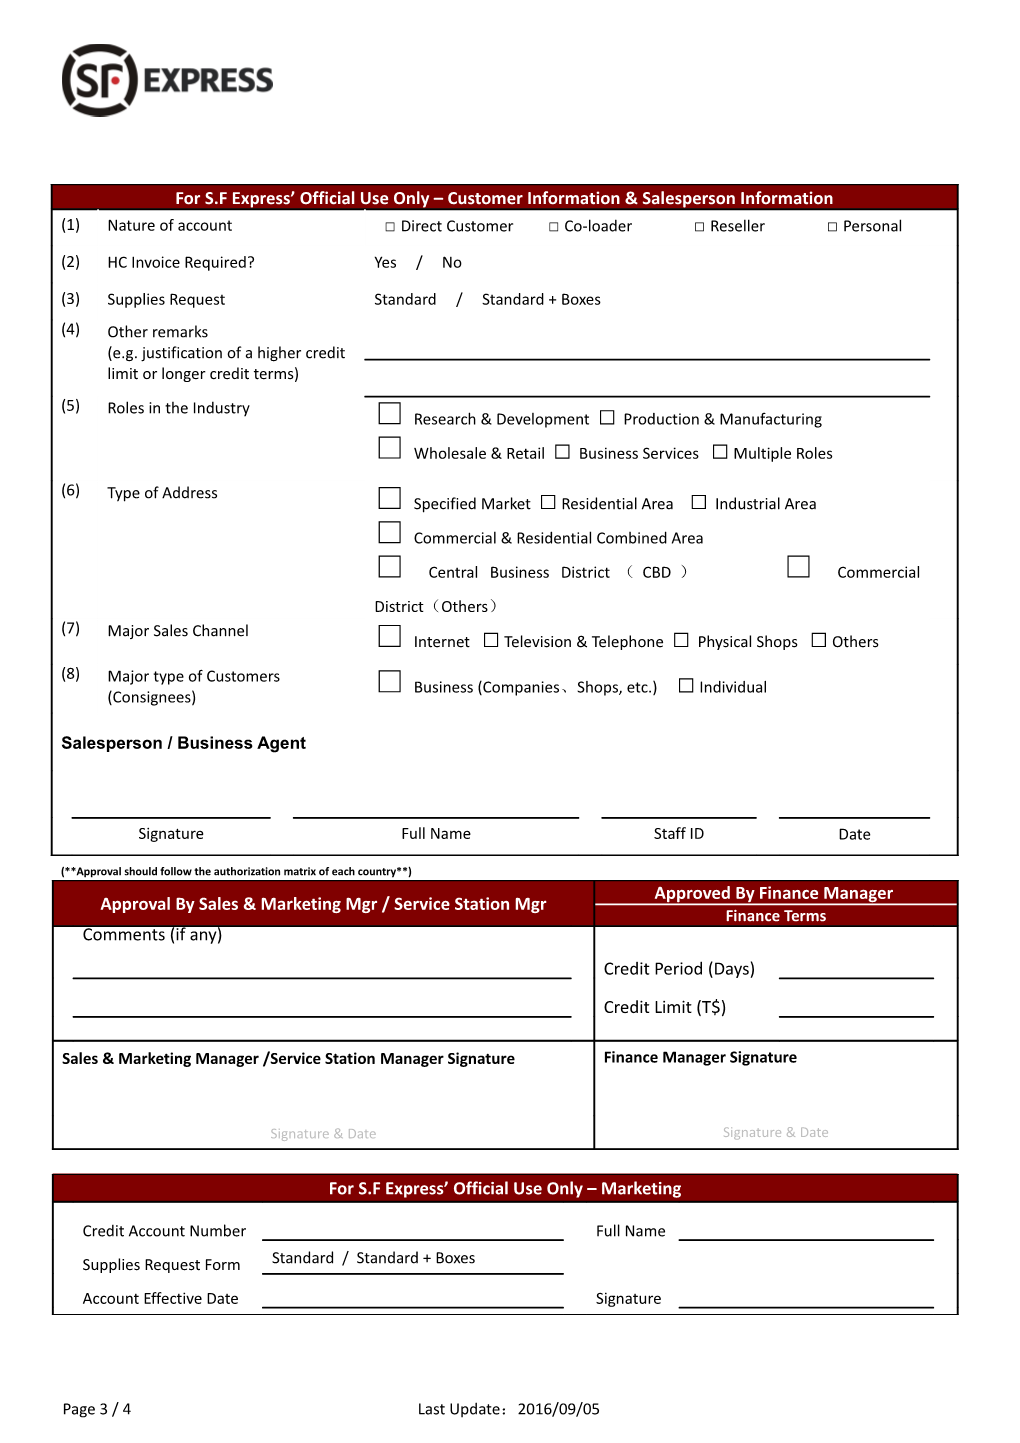 Credit Account Opening Form